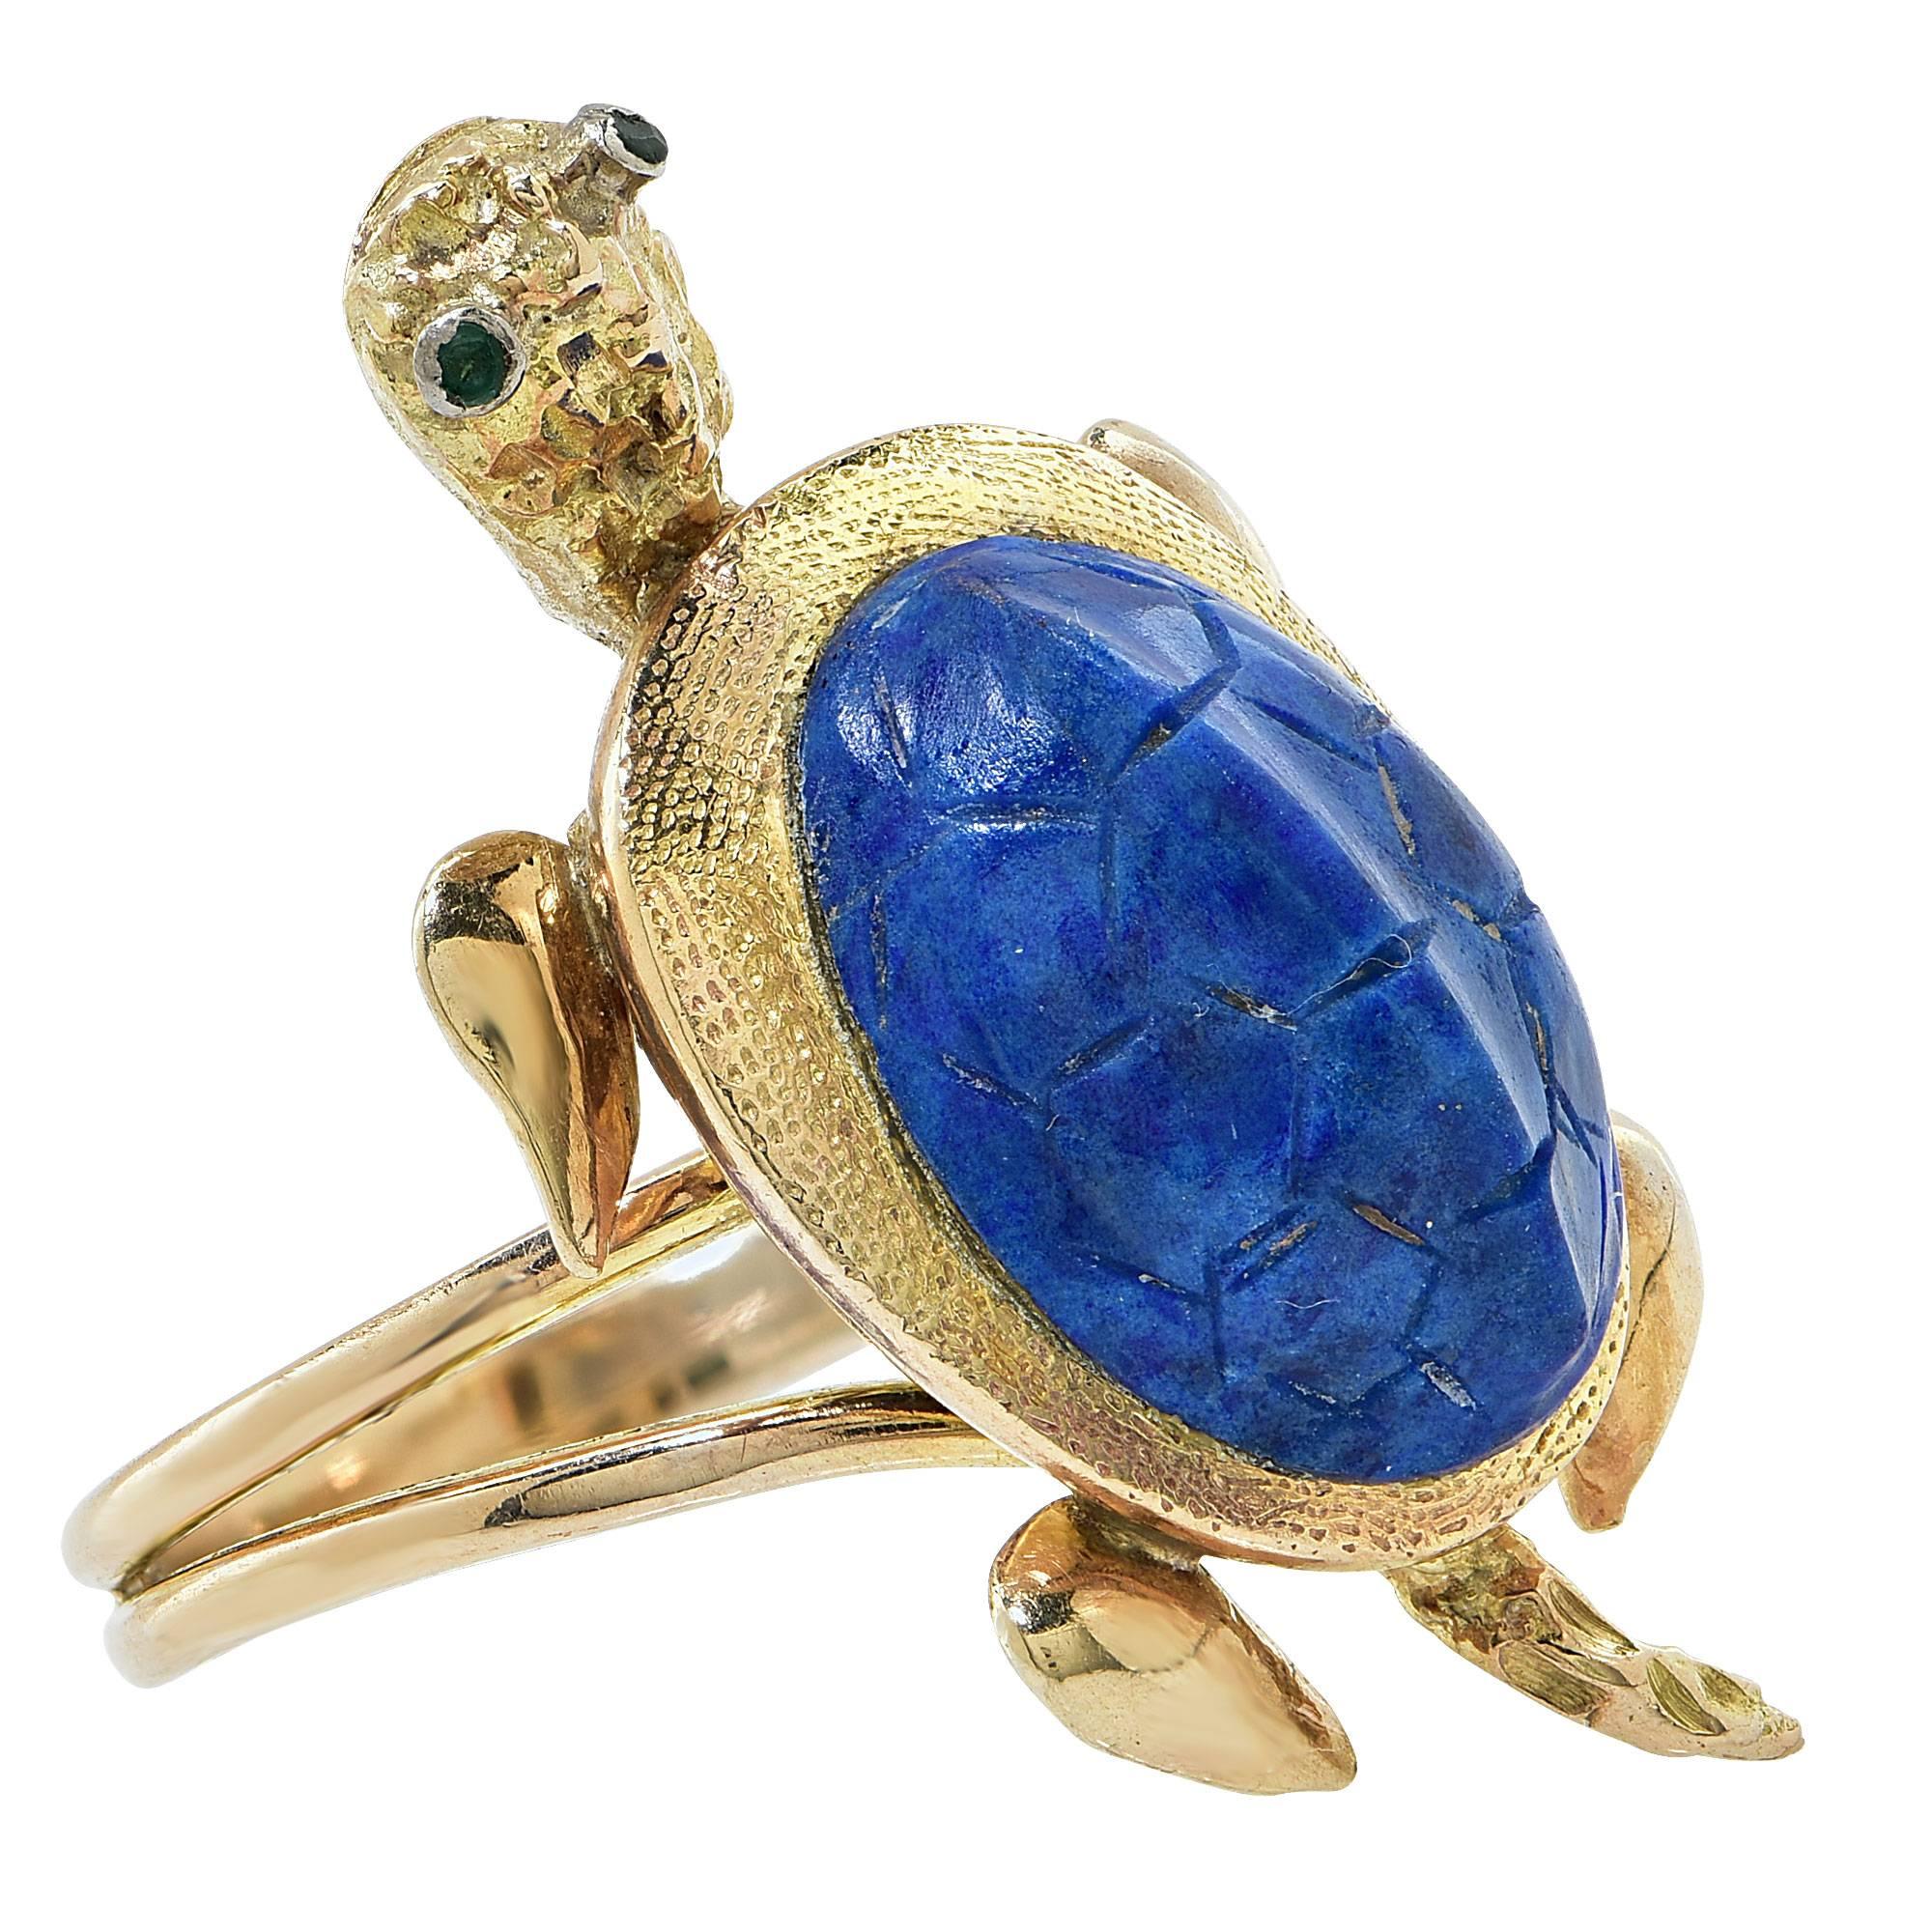 14k yellow gold ring featuring a carved lapis Turtle with round cut emeralds as eyes.

It is stamped and tested as 14k gold.
The metal weight is 8.24 grams.

This lapis bold ring is accompanied by a retail appraisal performed by a GIA Graduate